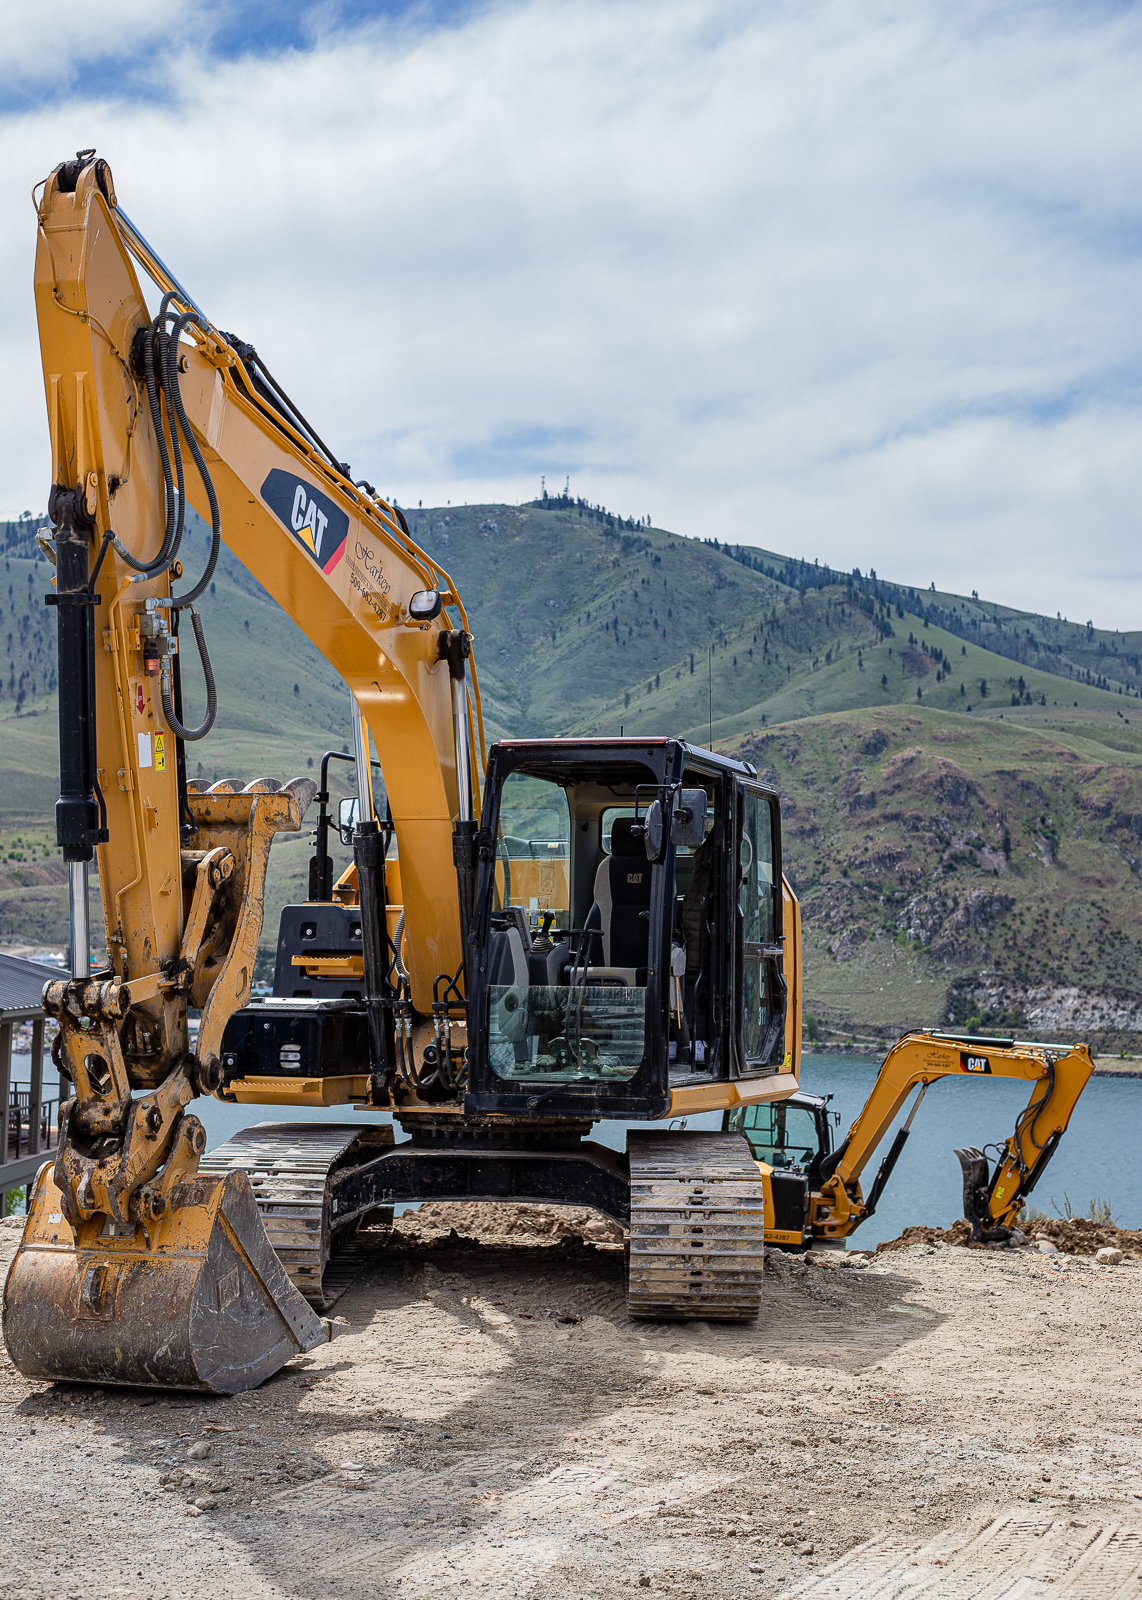 The Complete Guide To Becoming A Heavy Equipment Operator